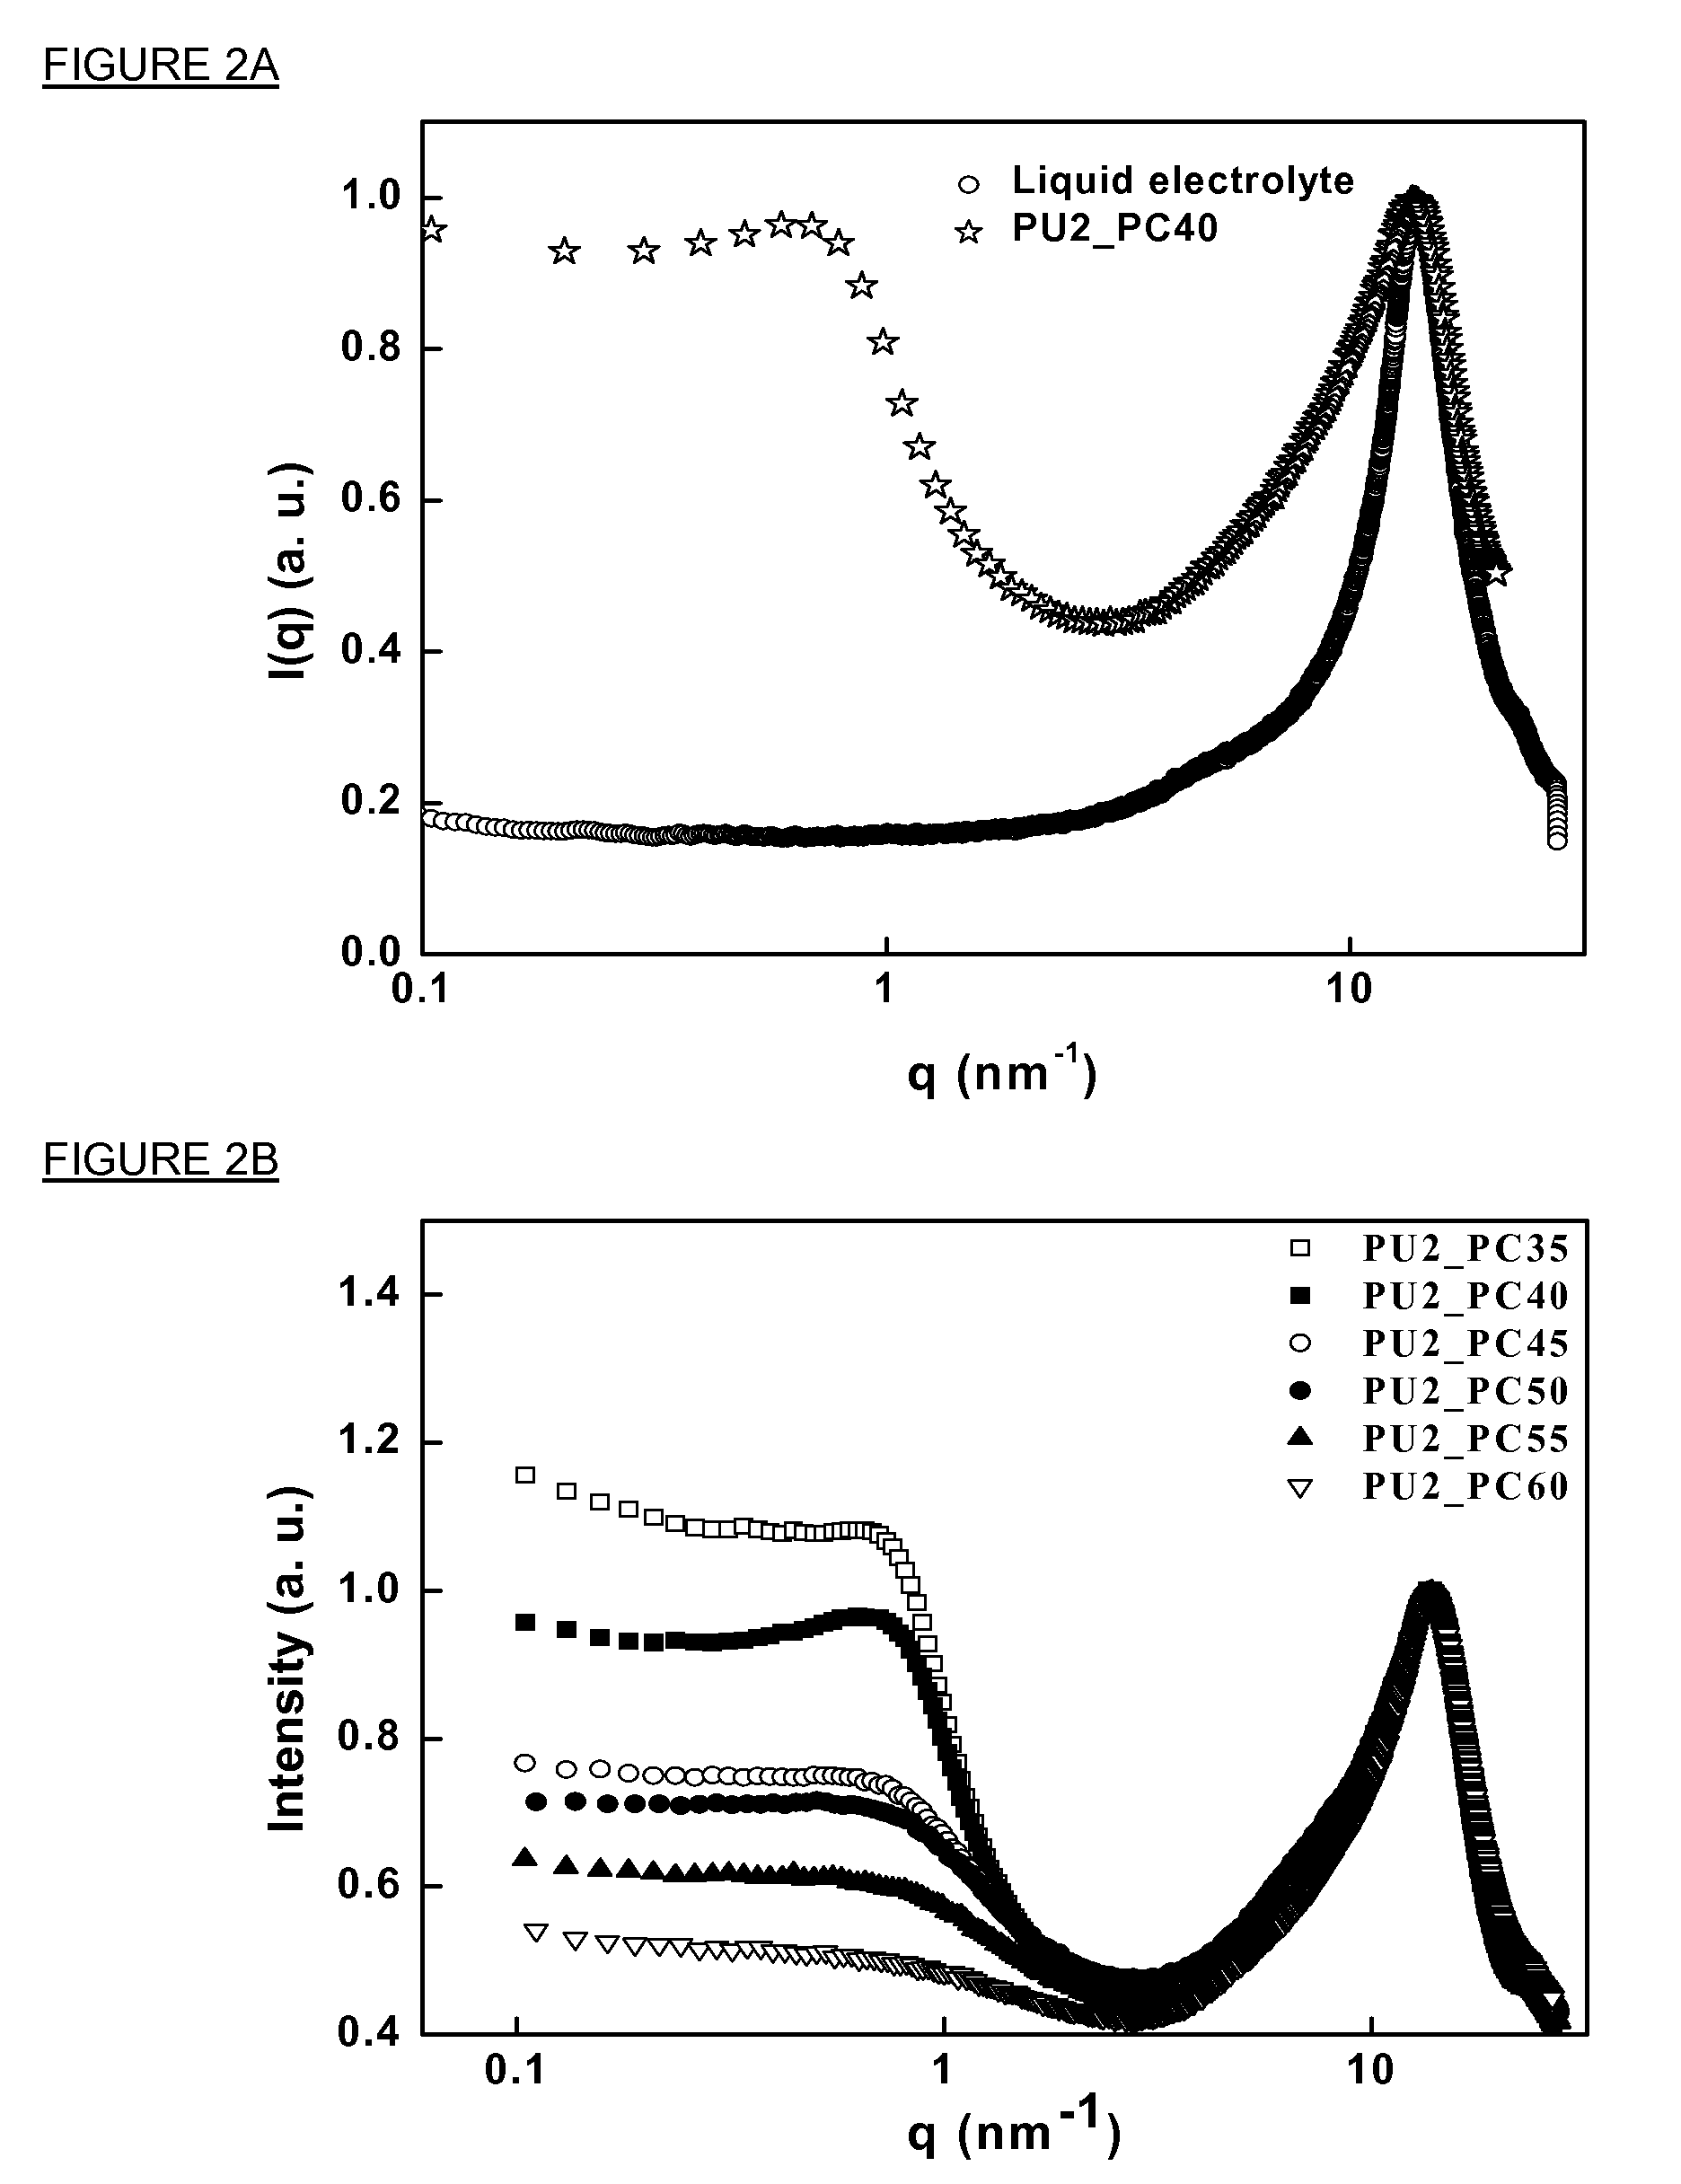 Polyurethane gel electrolytes with improved conductance and/or solvent retention